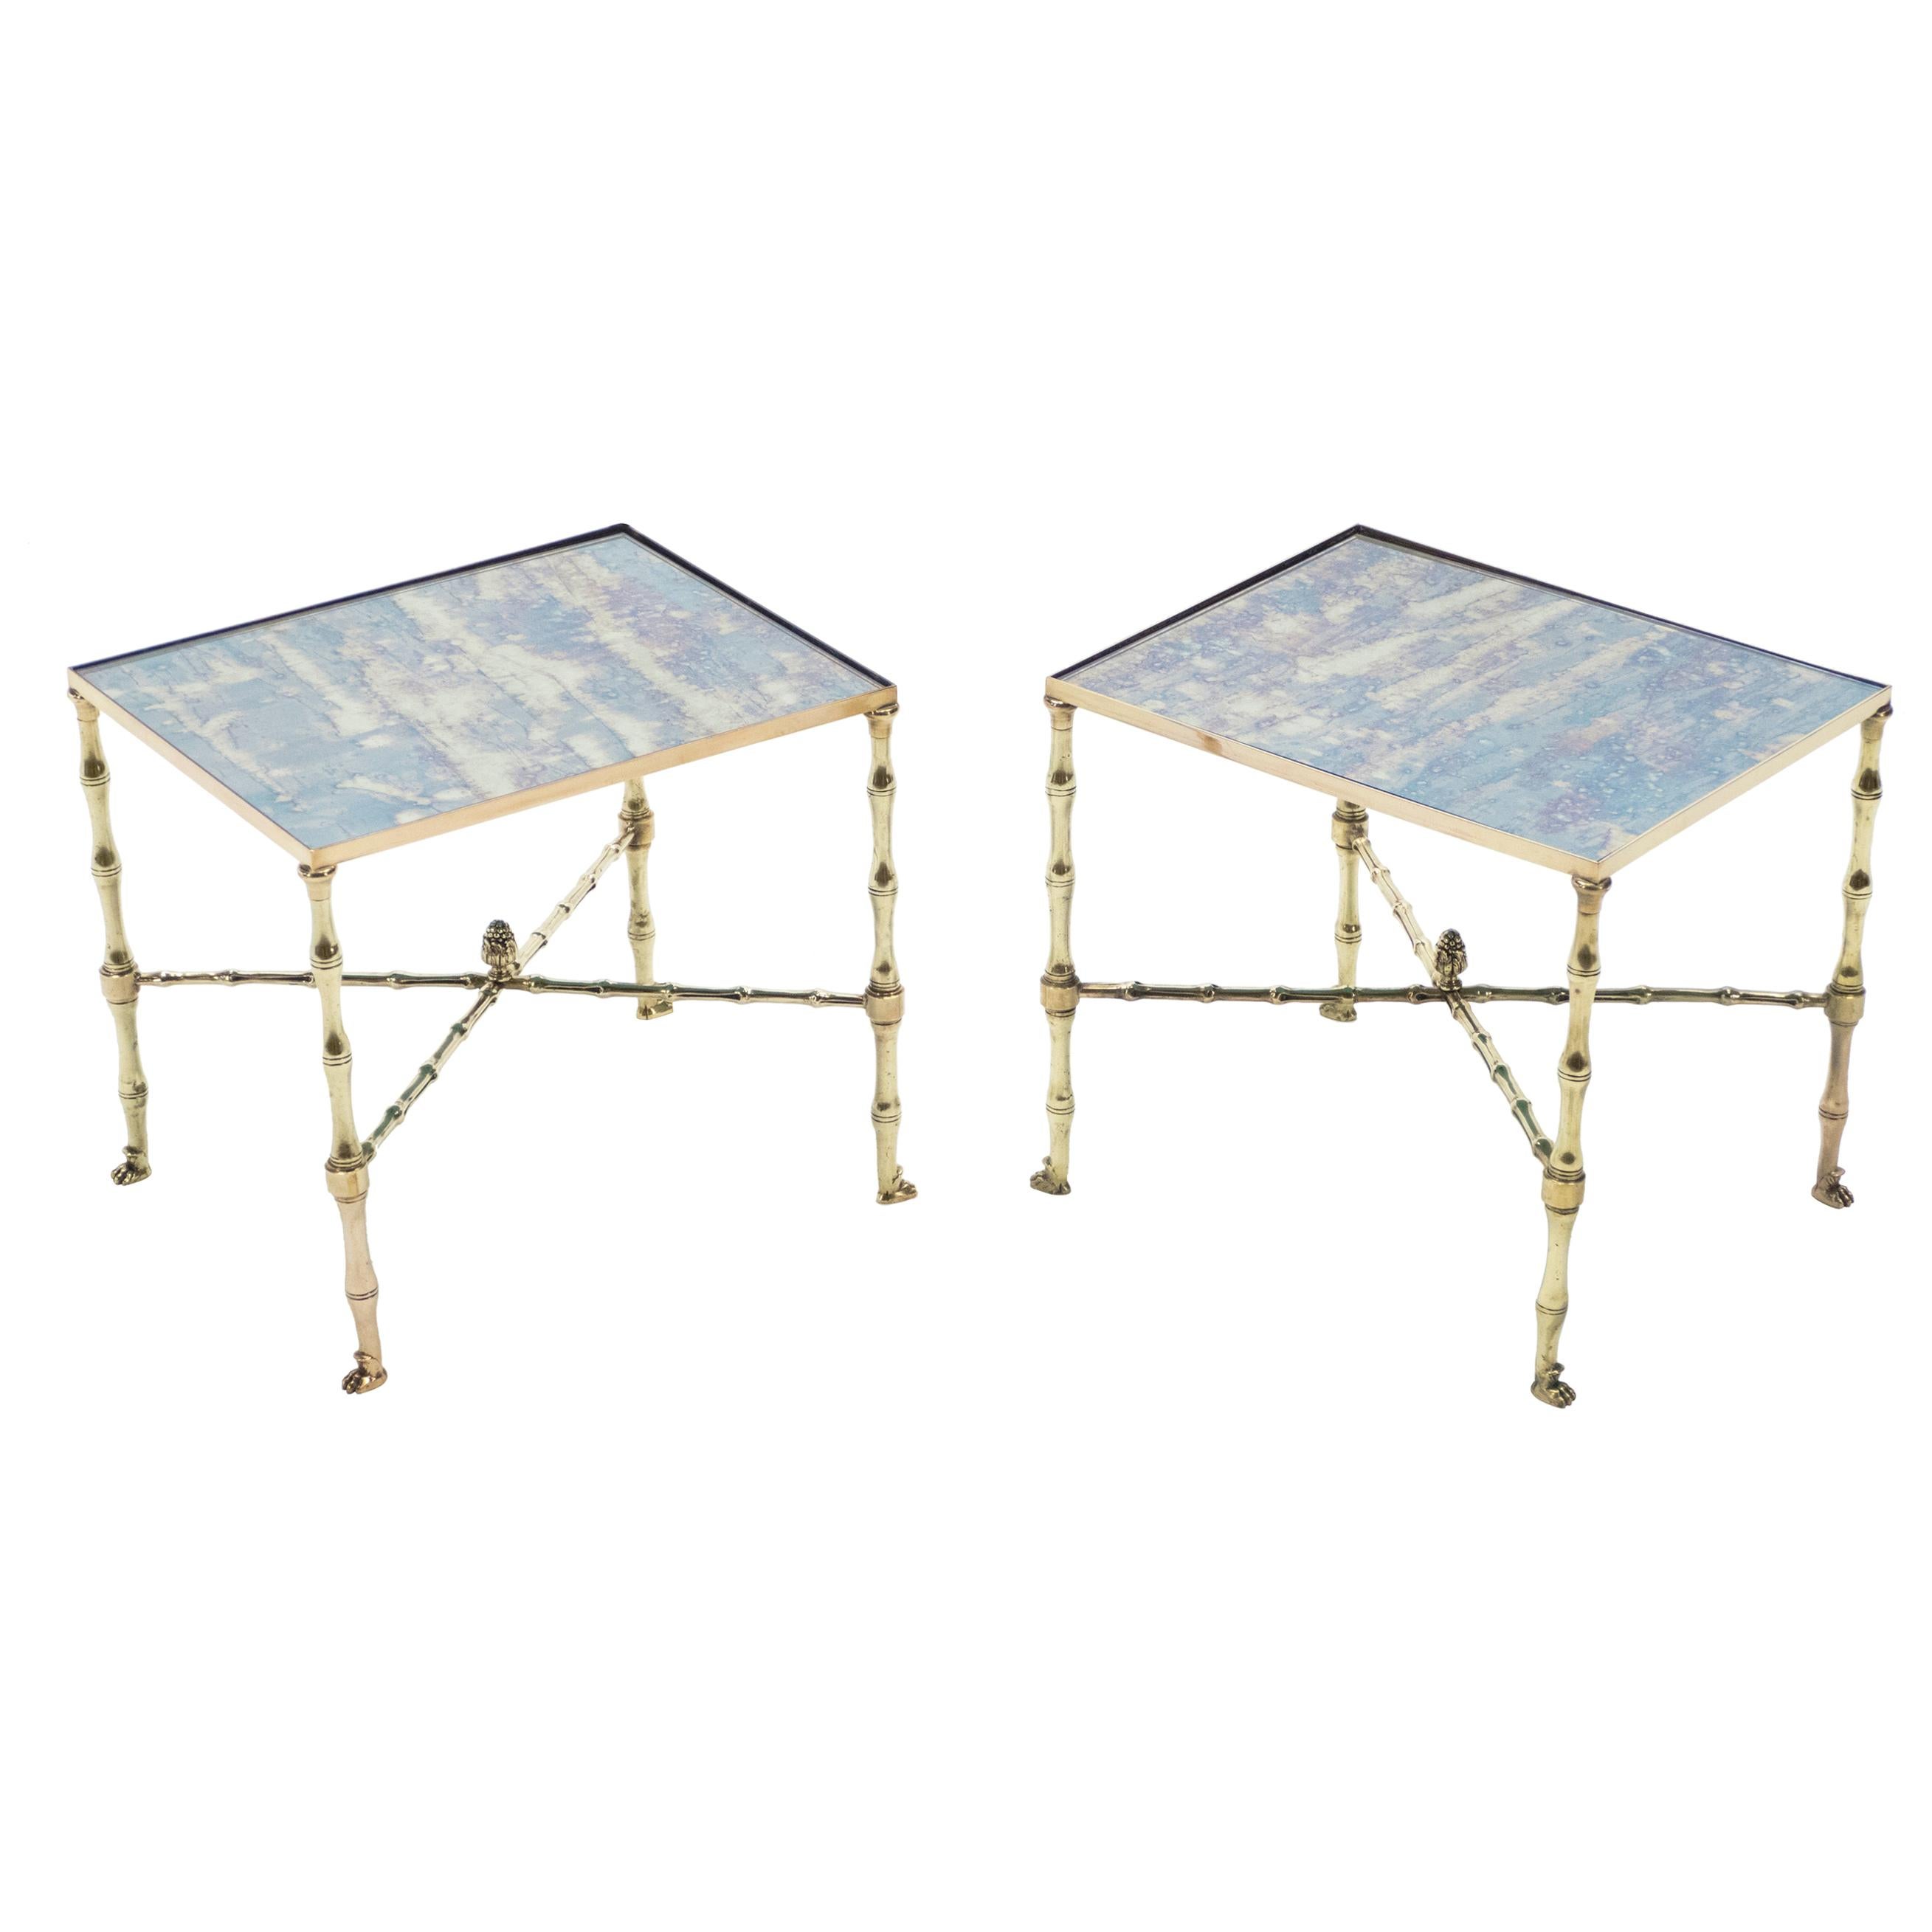 Pair of French Maison Jansen Brass Mirrored End Tables, 1960s